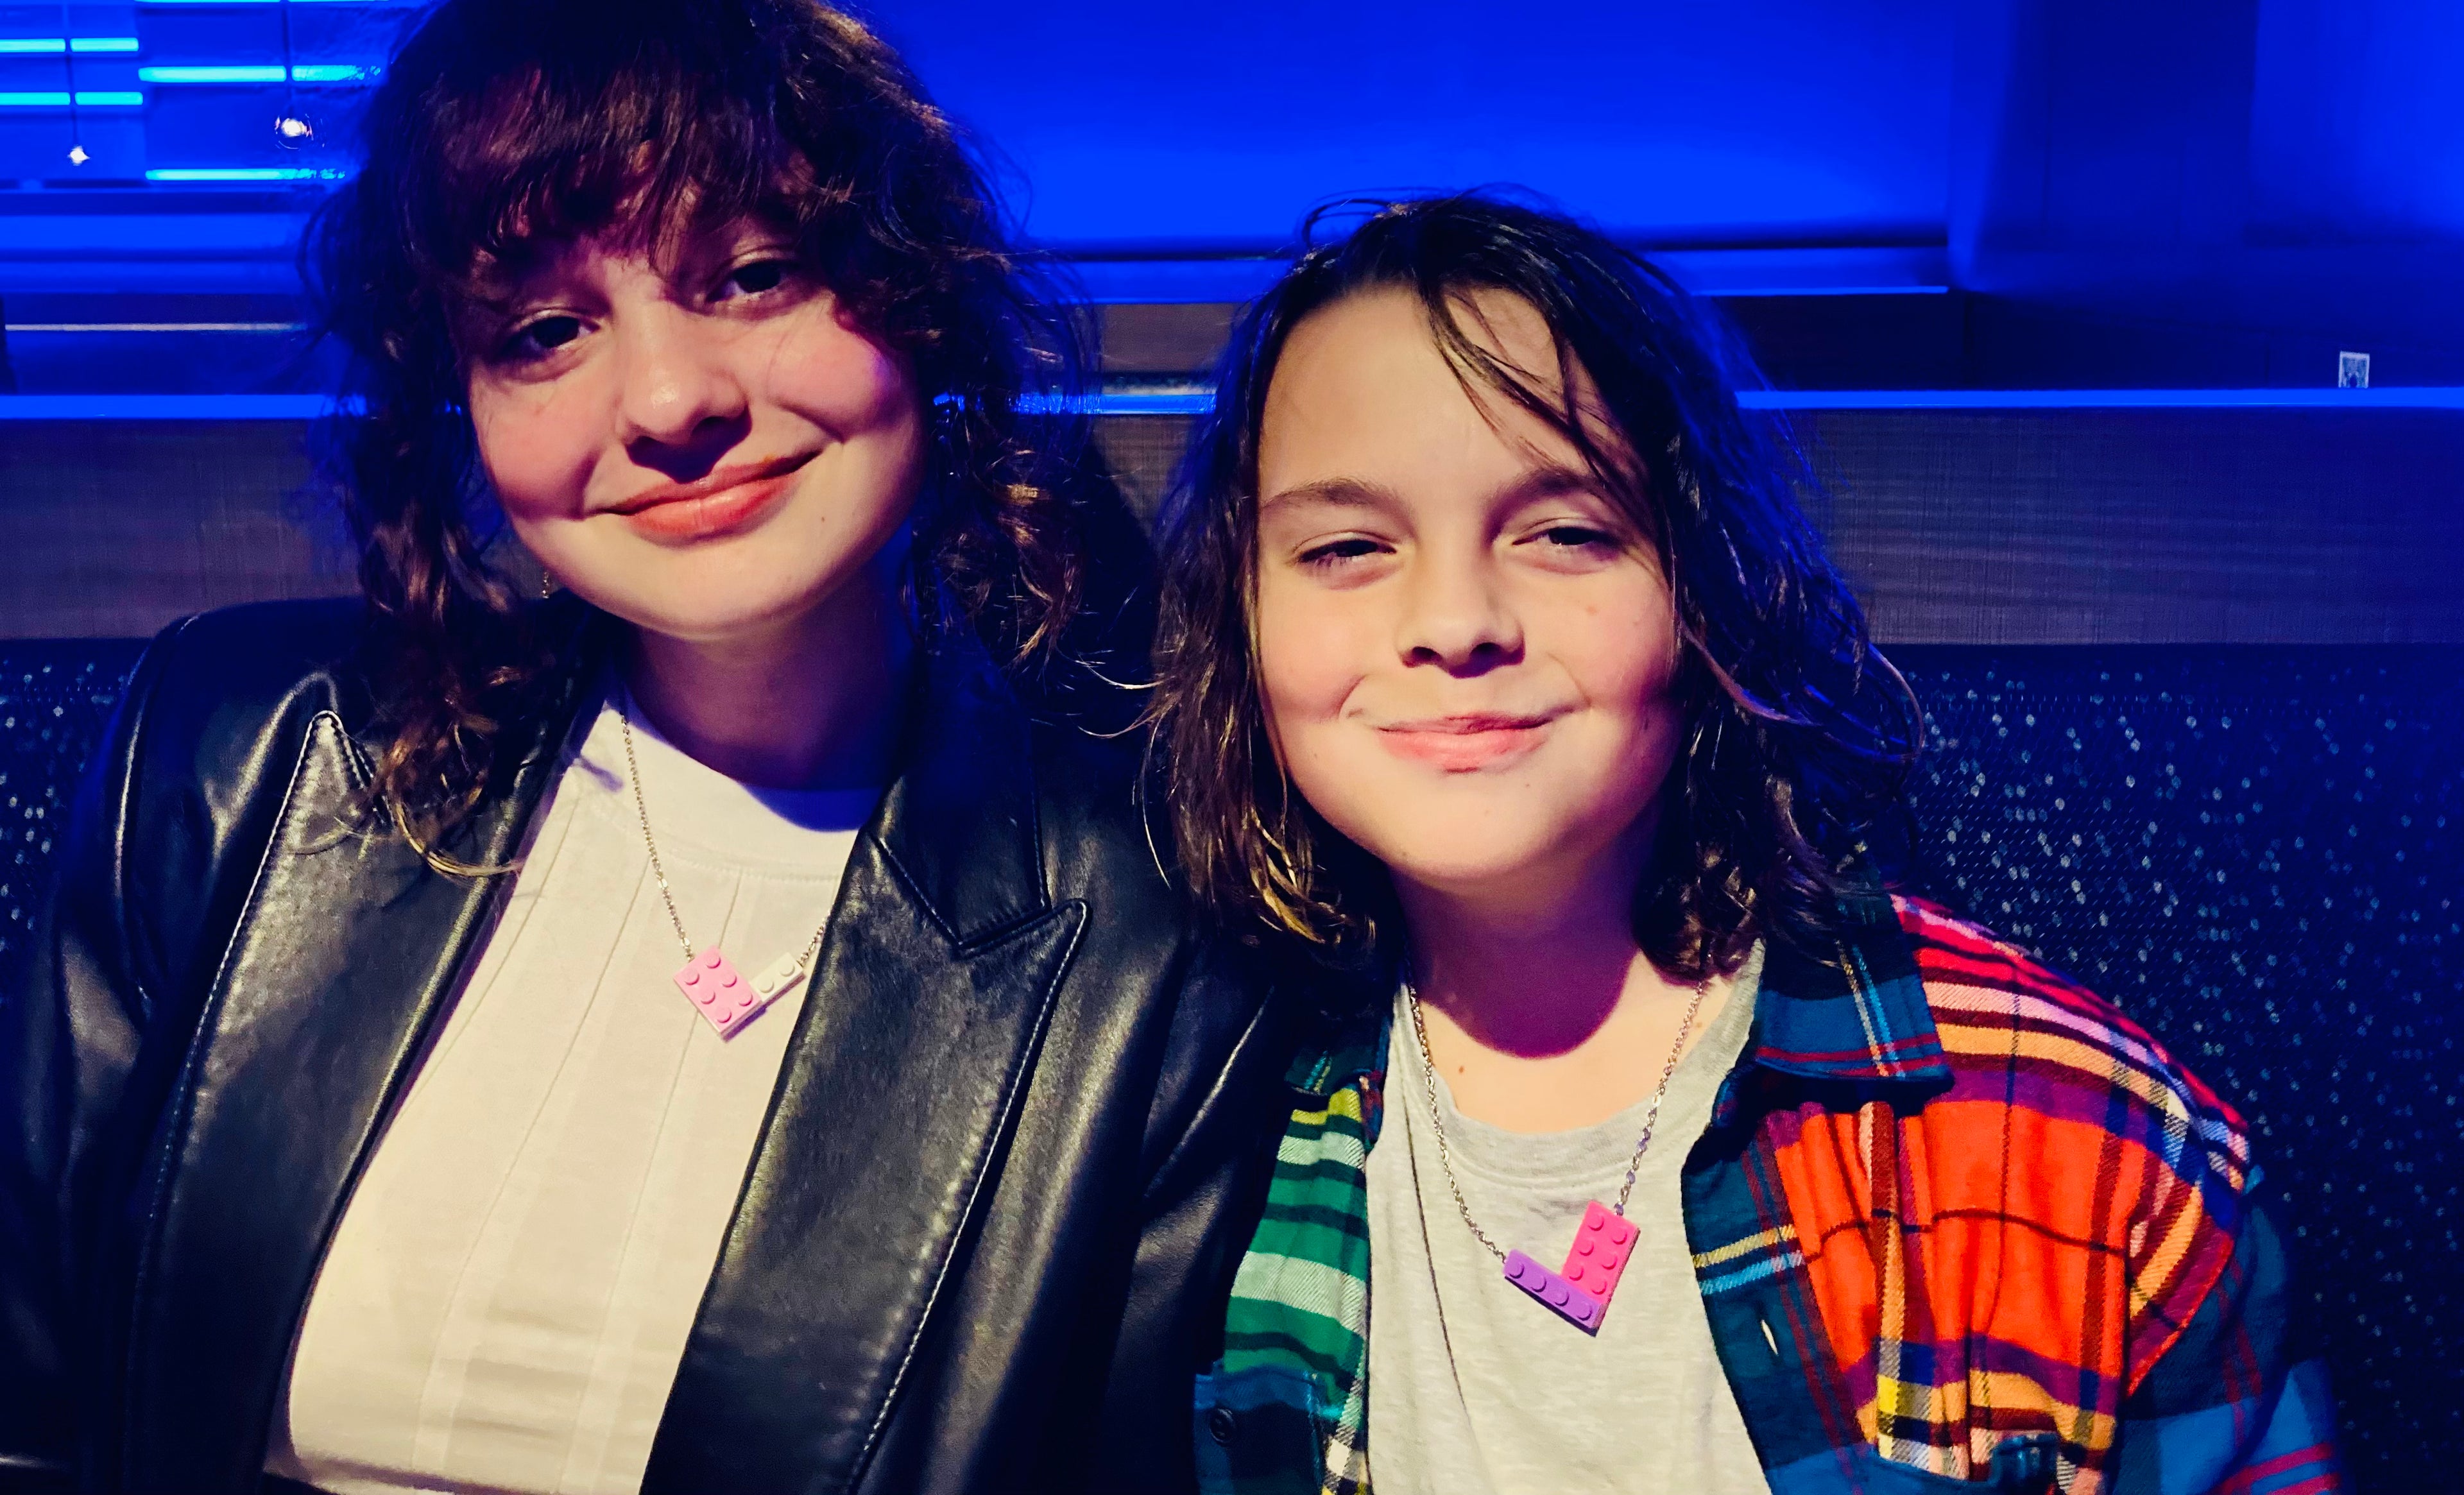 Two youth children smiling and wearing pink, white, and purple colored Tu Snaps necklaces made from Lego pieces